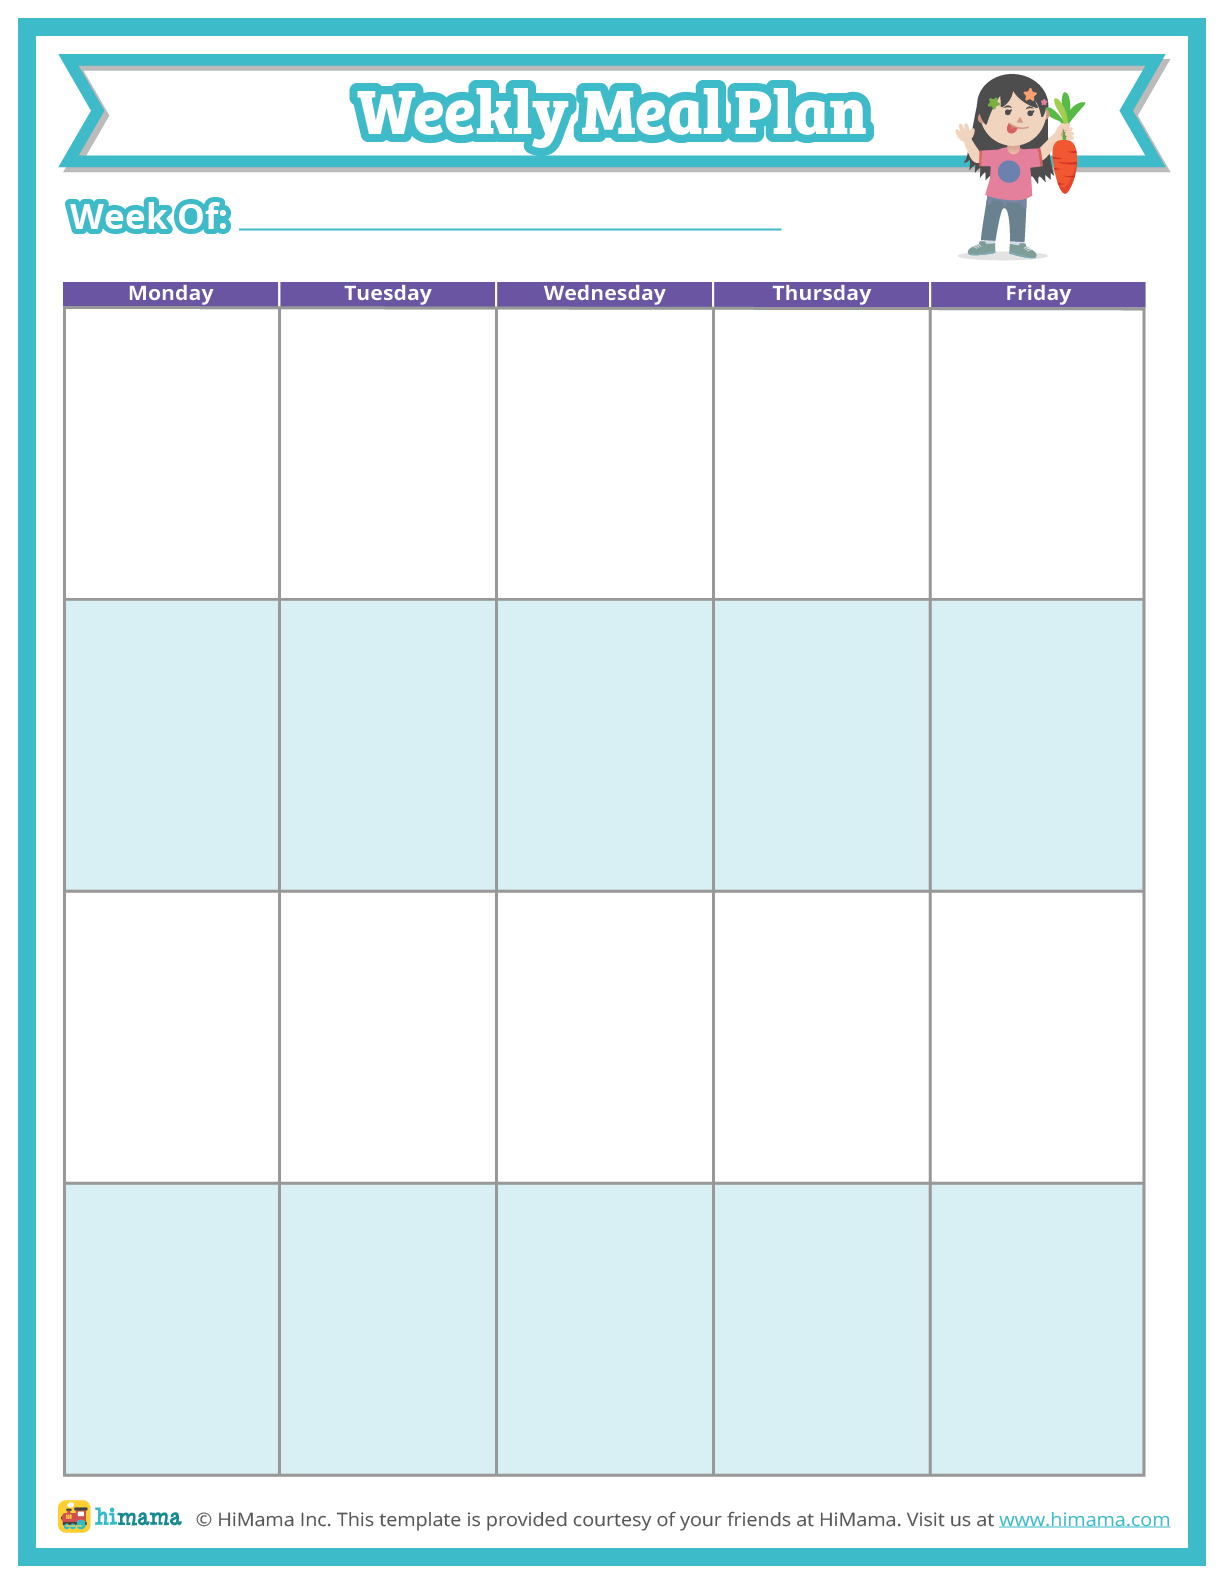 Daycare Menu Template: Weekly and Monthly HiMama